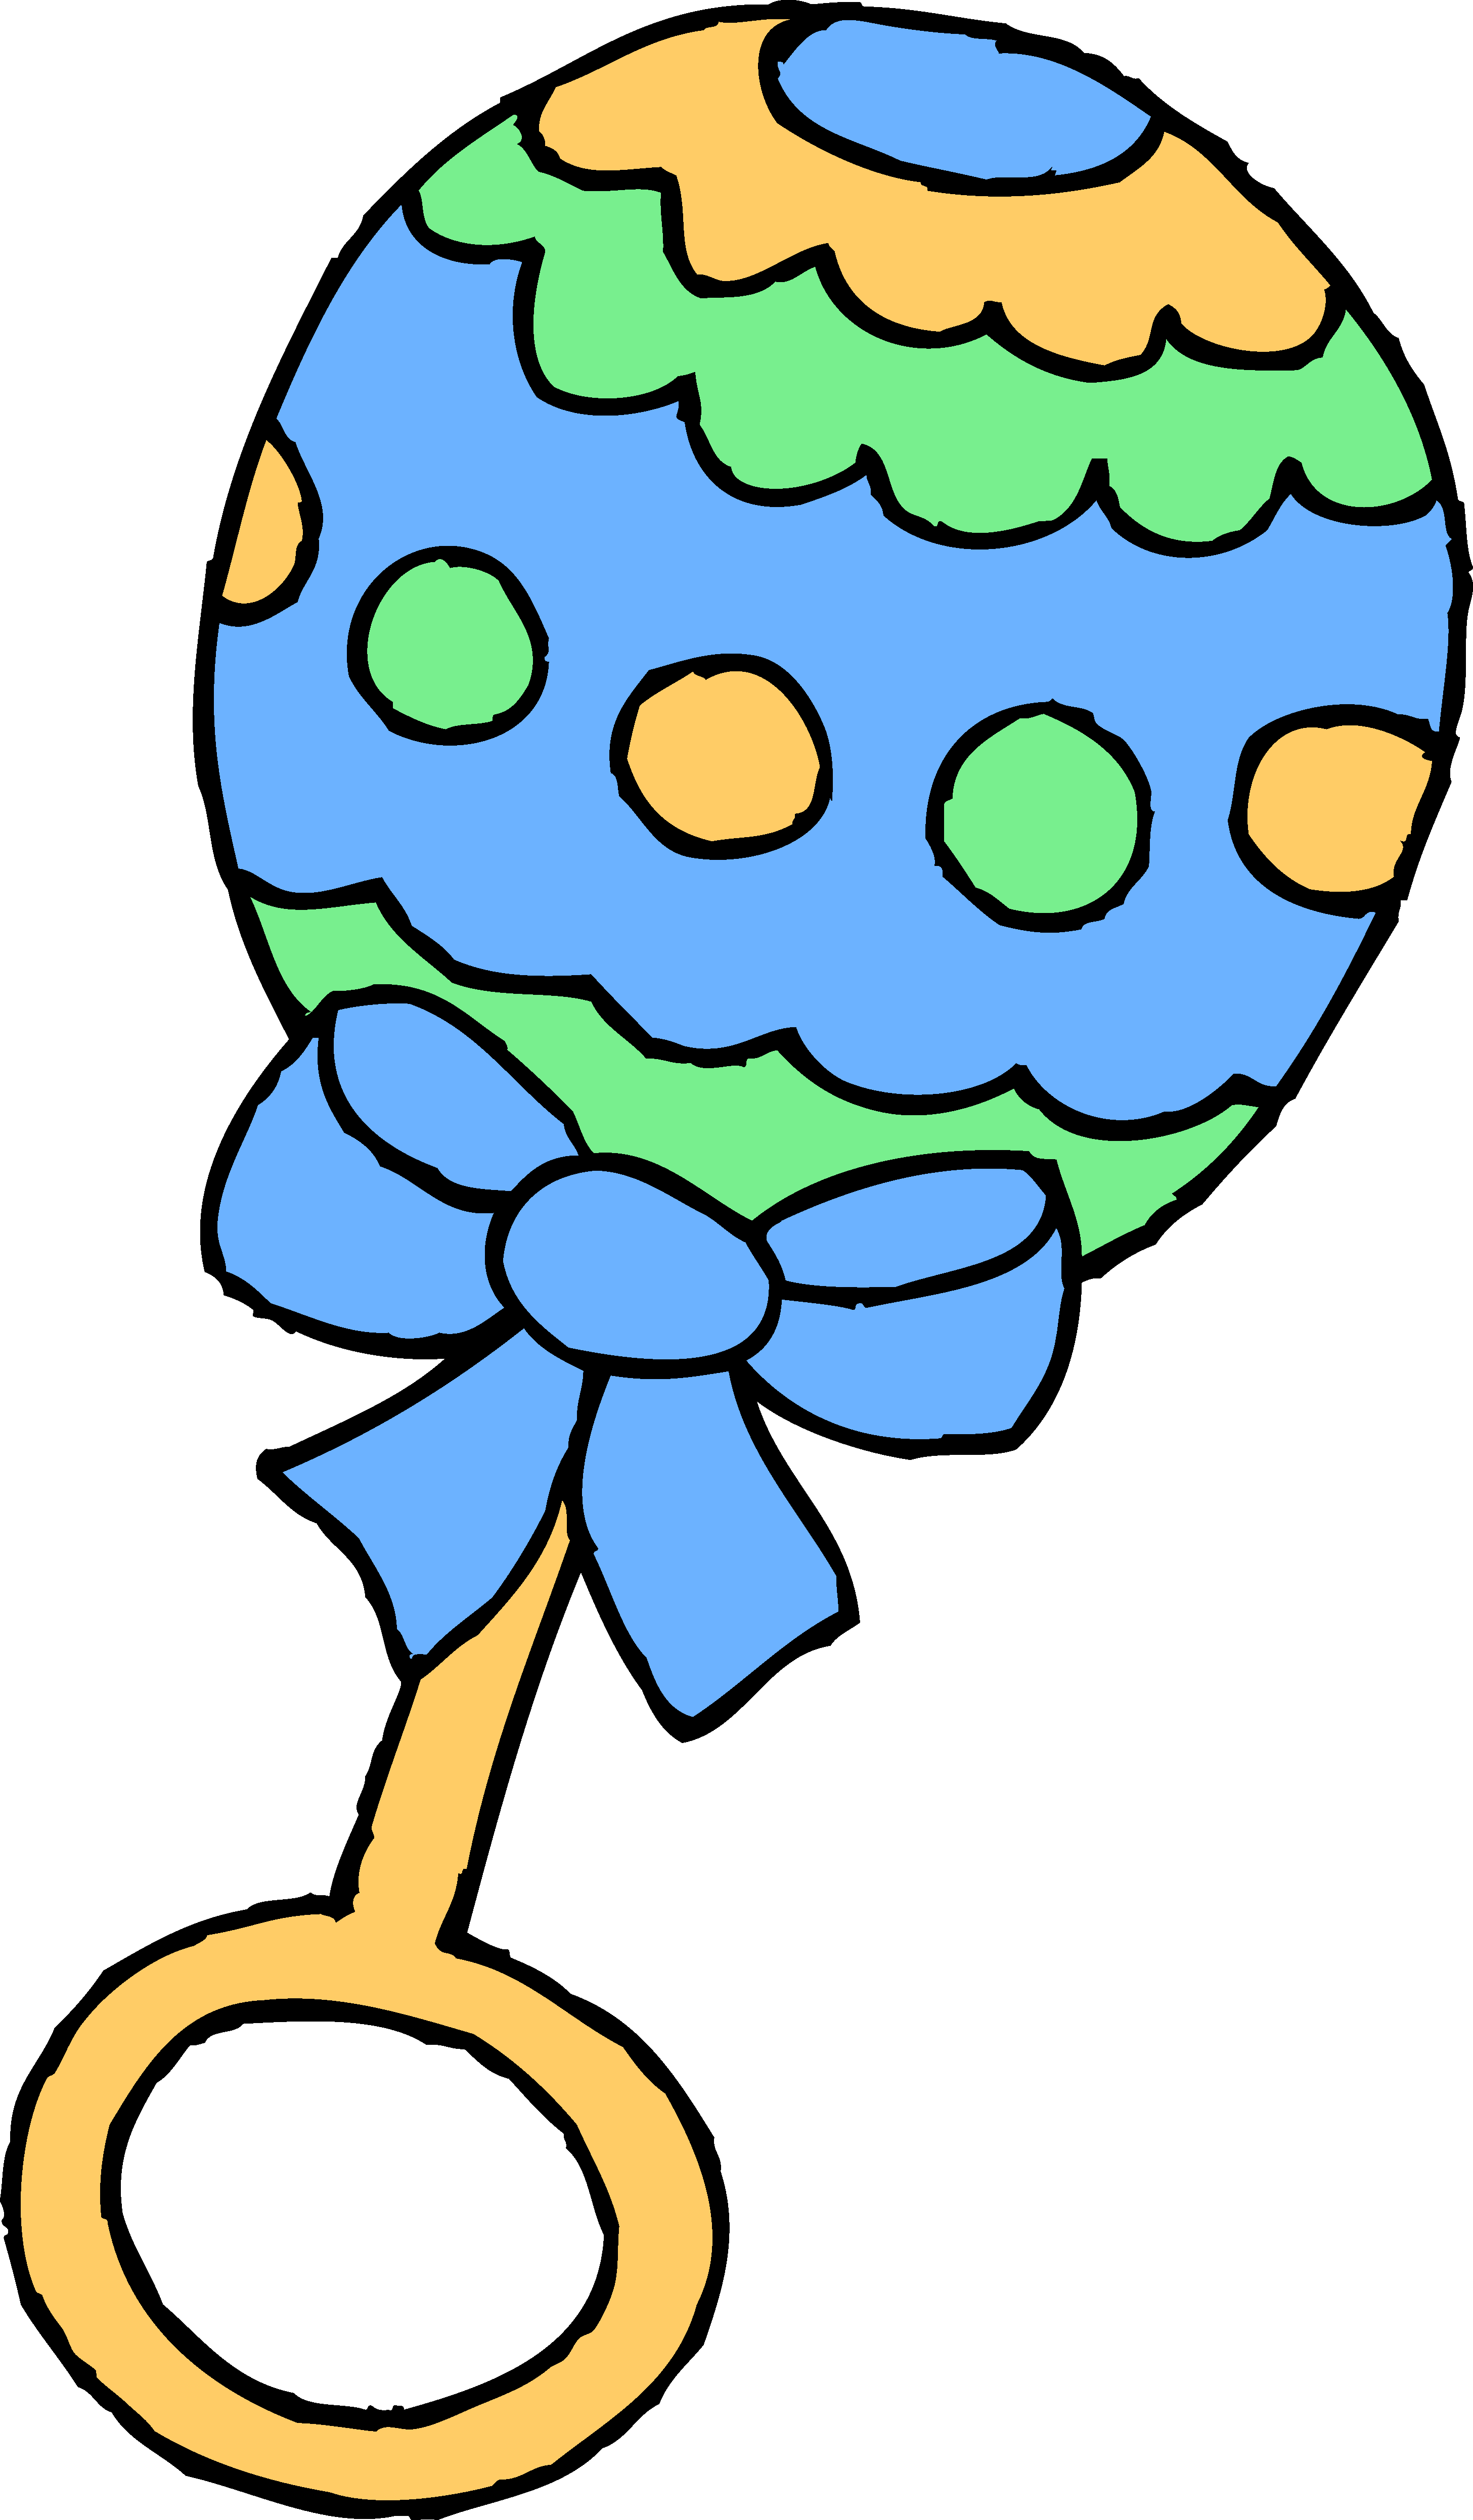 Baby rattle clipart